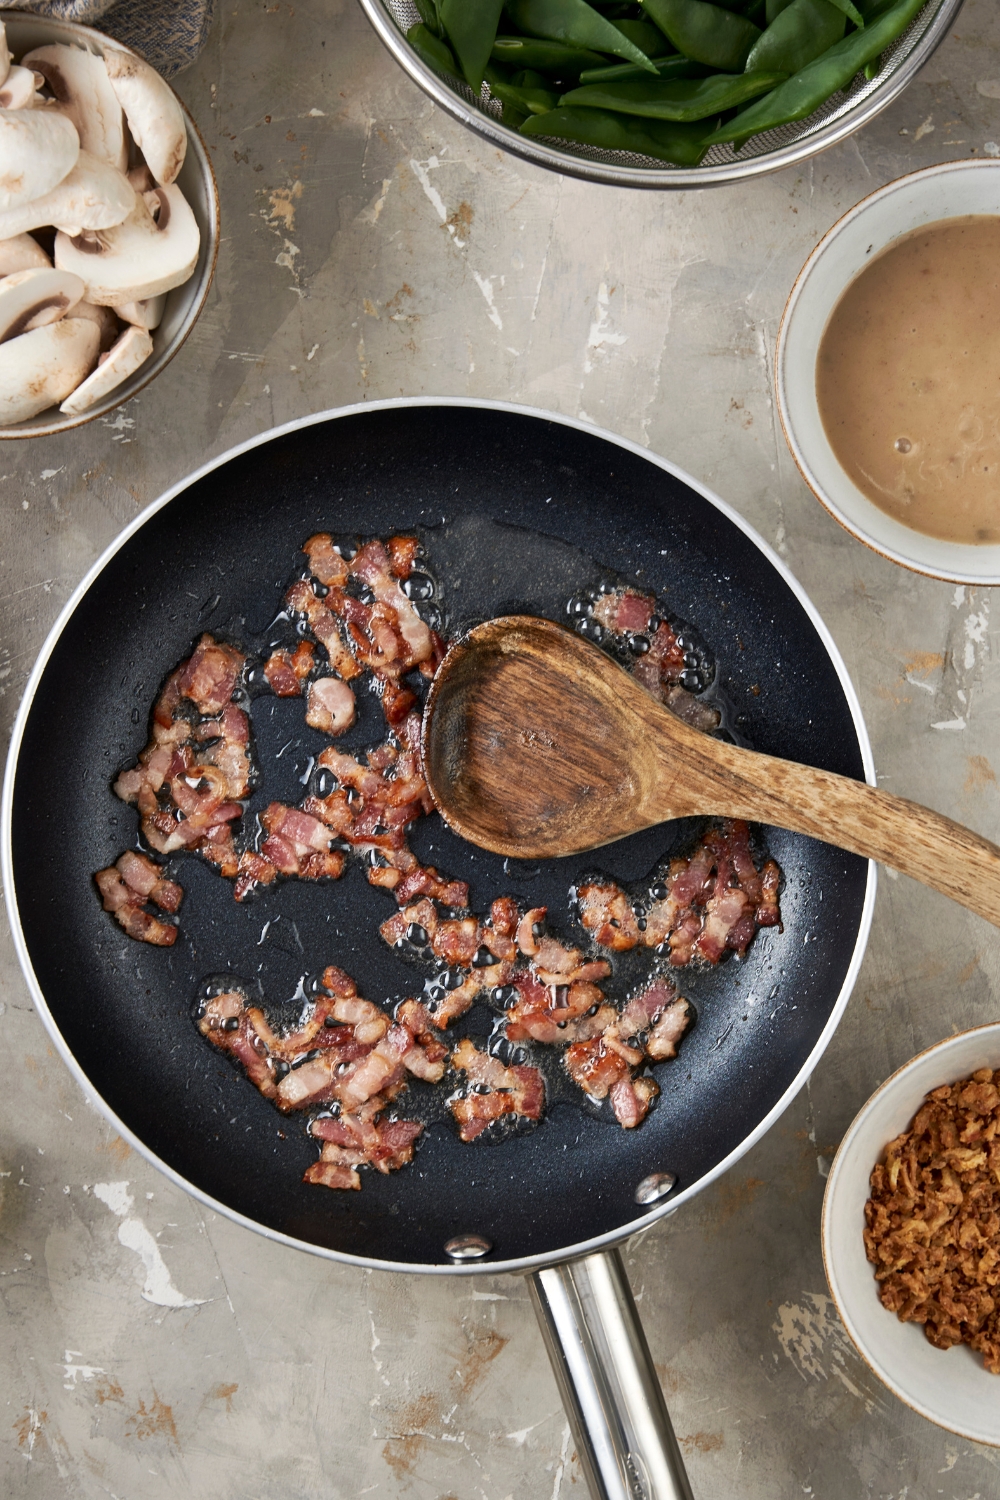 Diced bacon pieces are cooking in a black frying pan. They are turning brown and crispy. A wooden spoon rests in the pan.